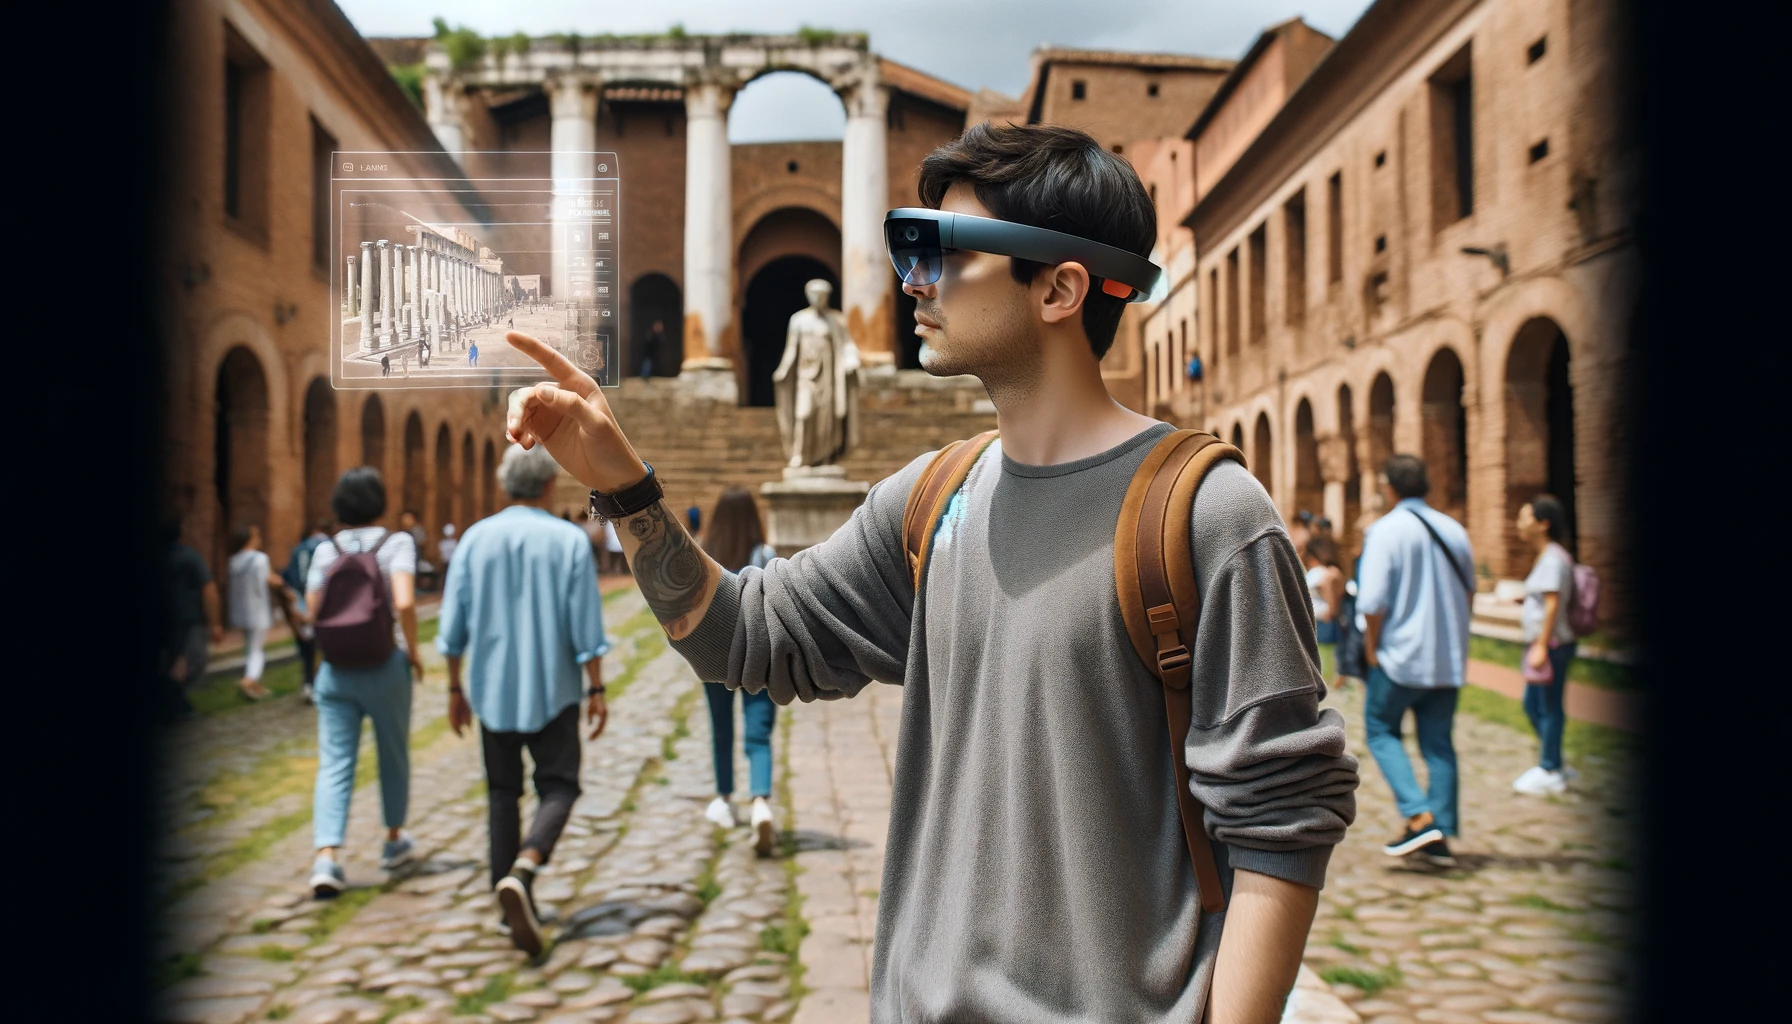 Tourist using Hololens 2 Mixed Reality goggles during a guided tour